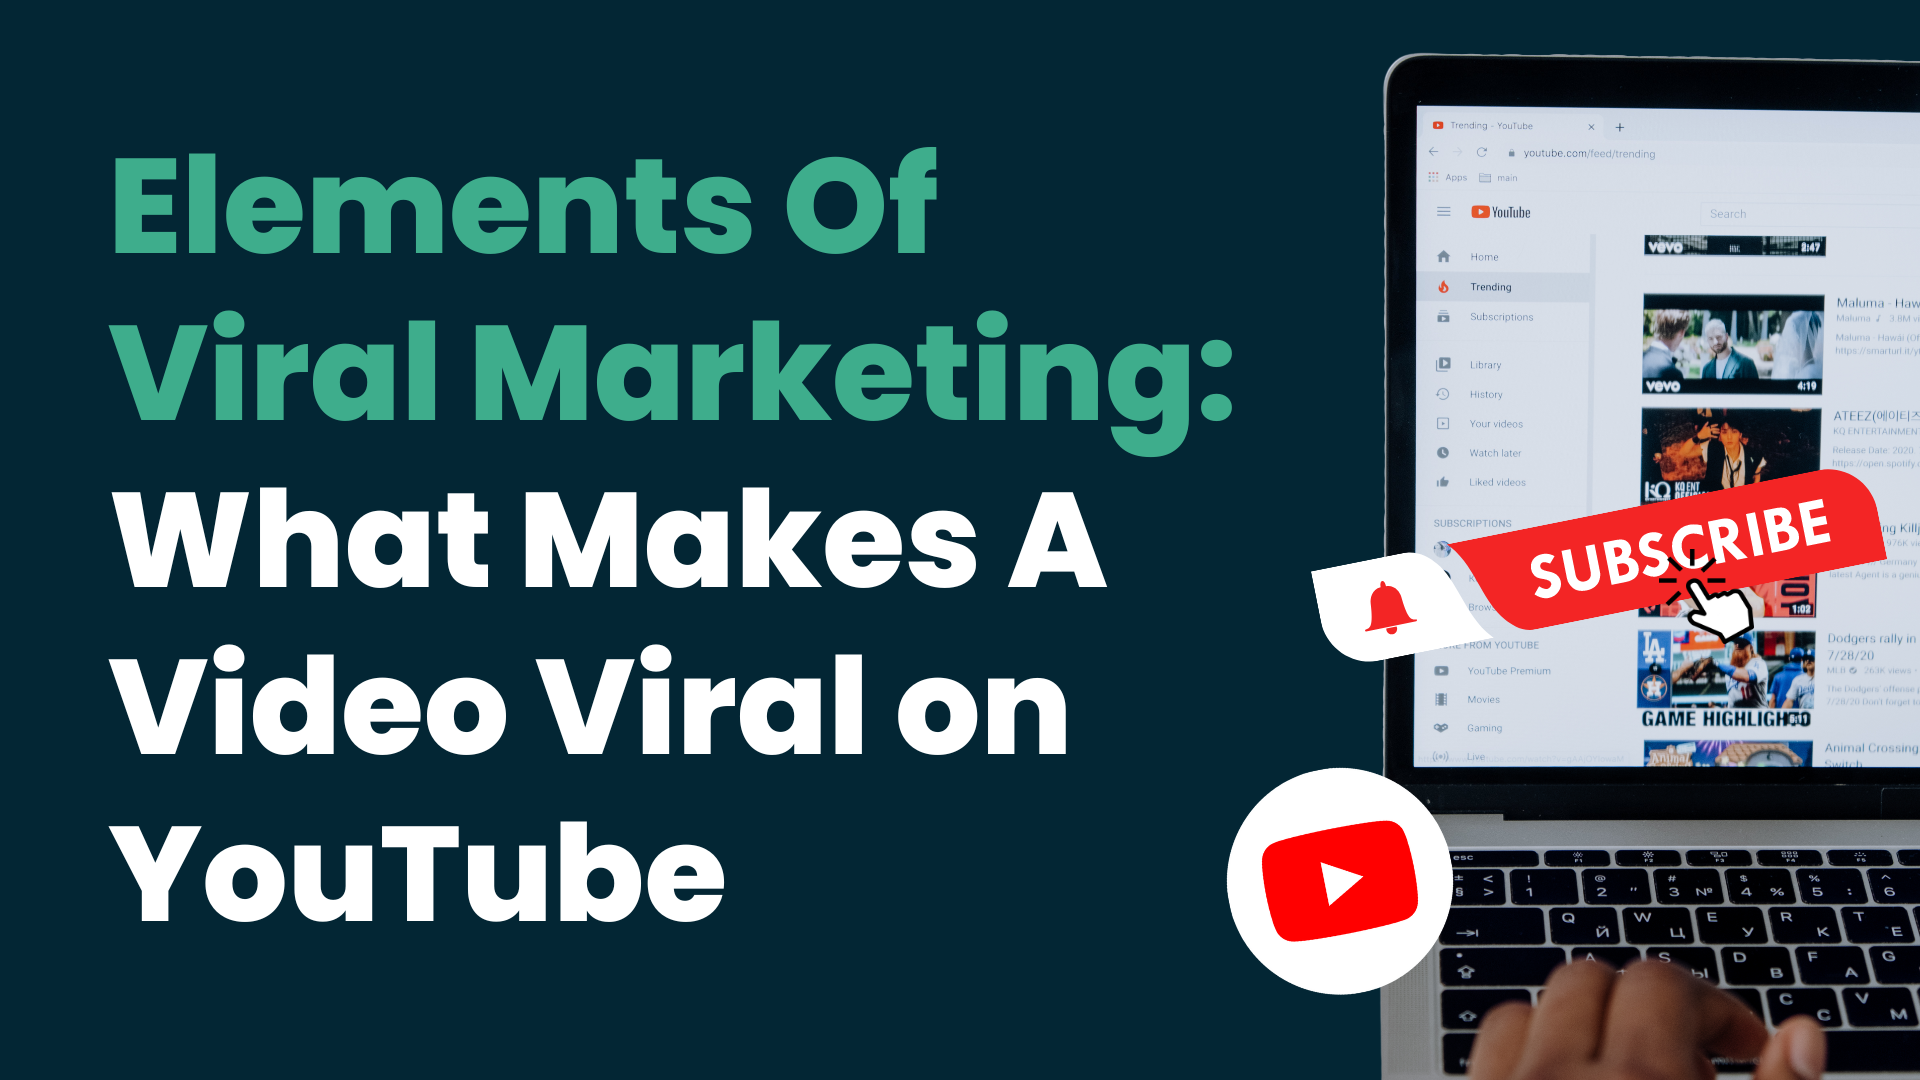 Elements Of Viral Marketing: What Makes A Video Viral on YouTube